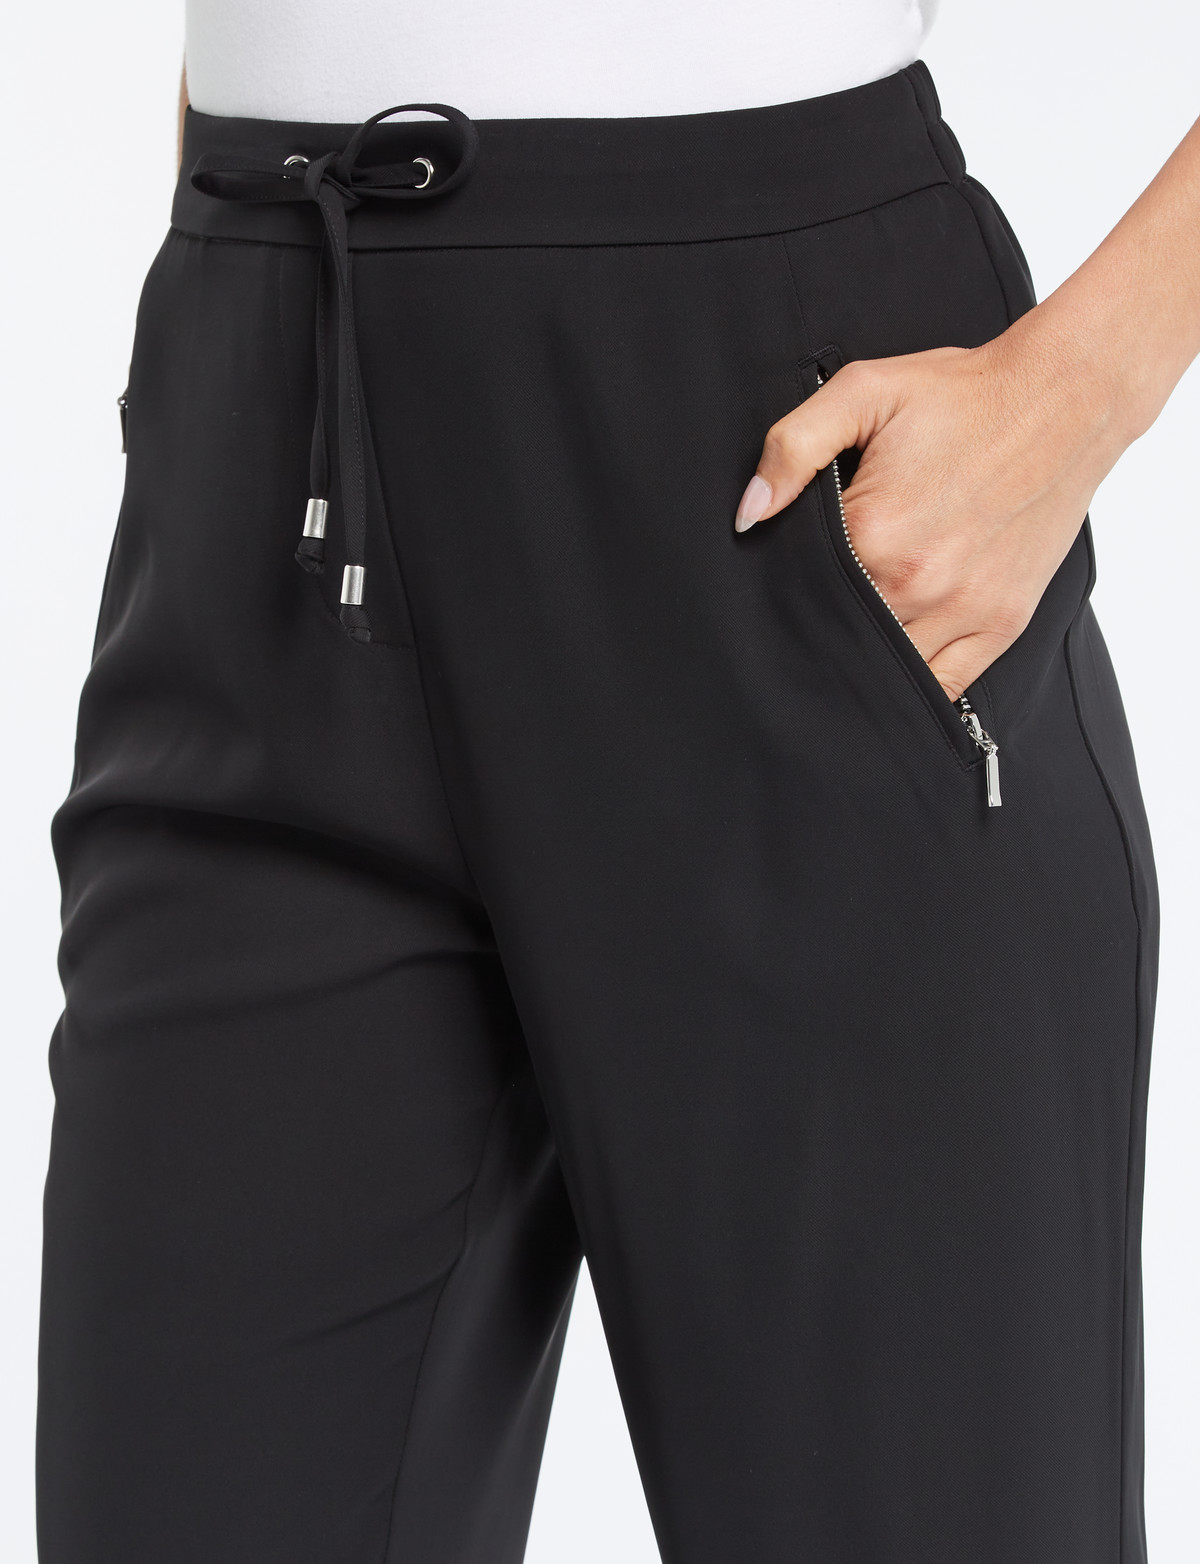 Oliver Eco-Leather Maternity Jogger Pants in Black - hautemama